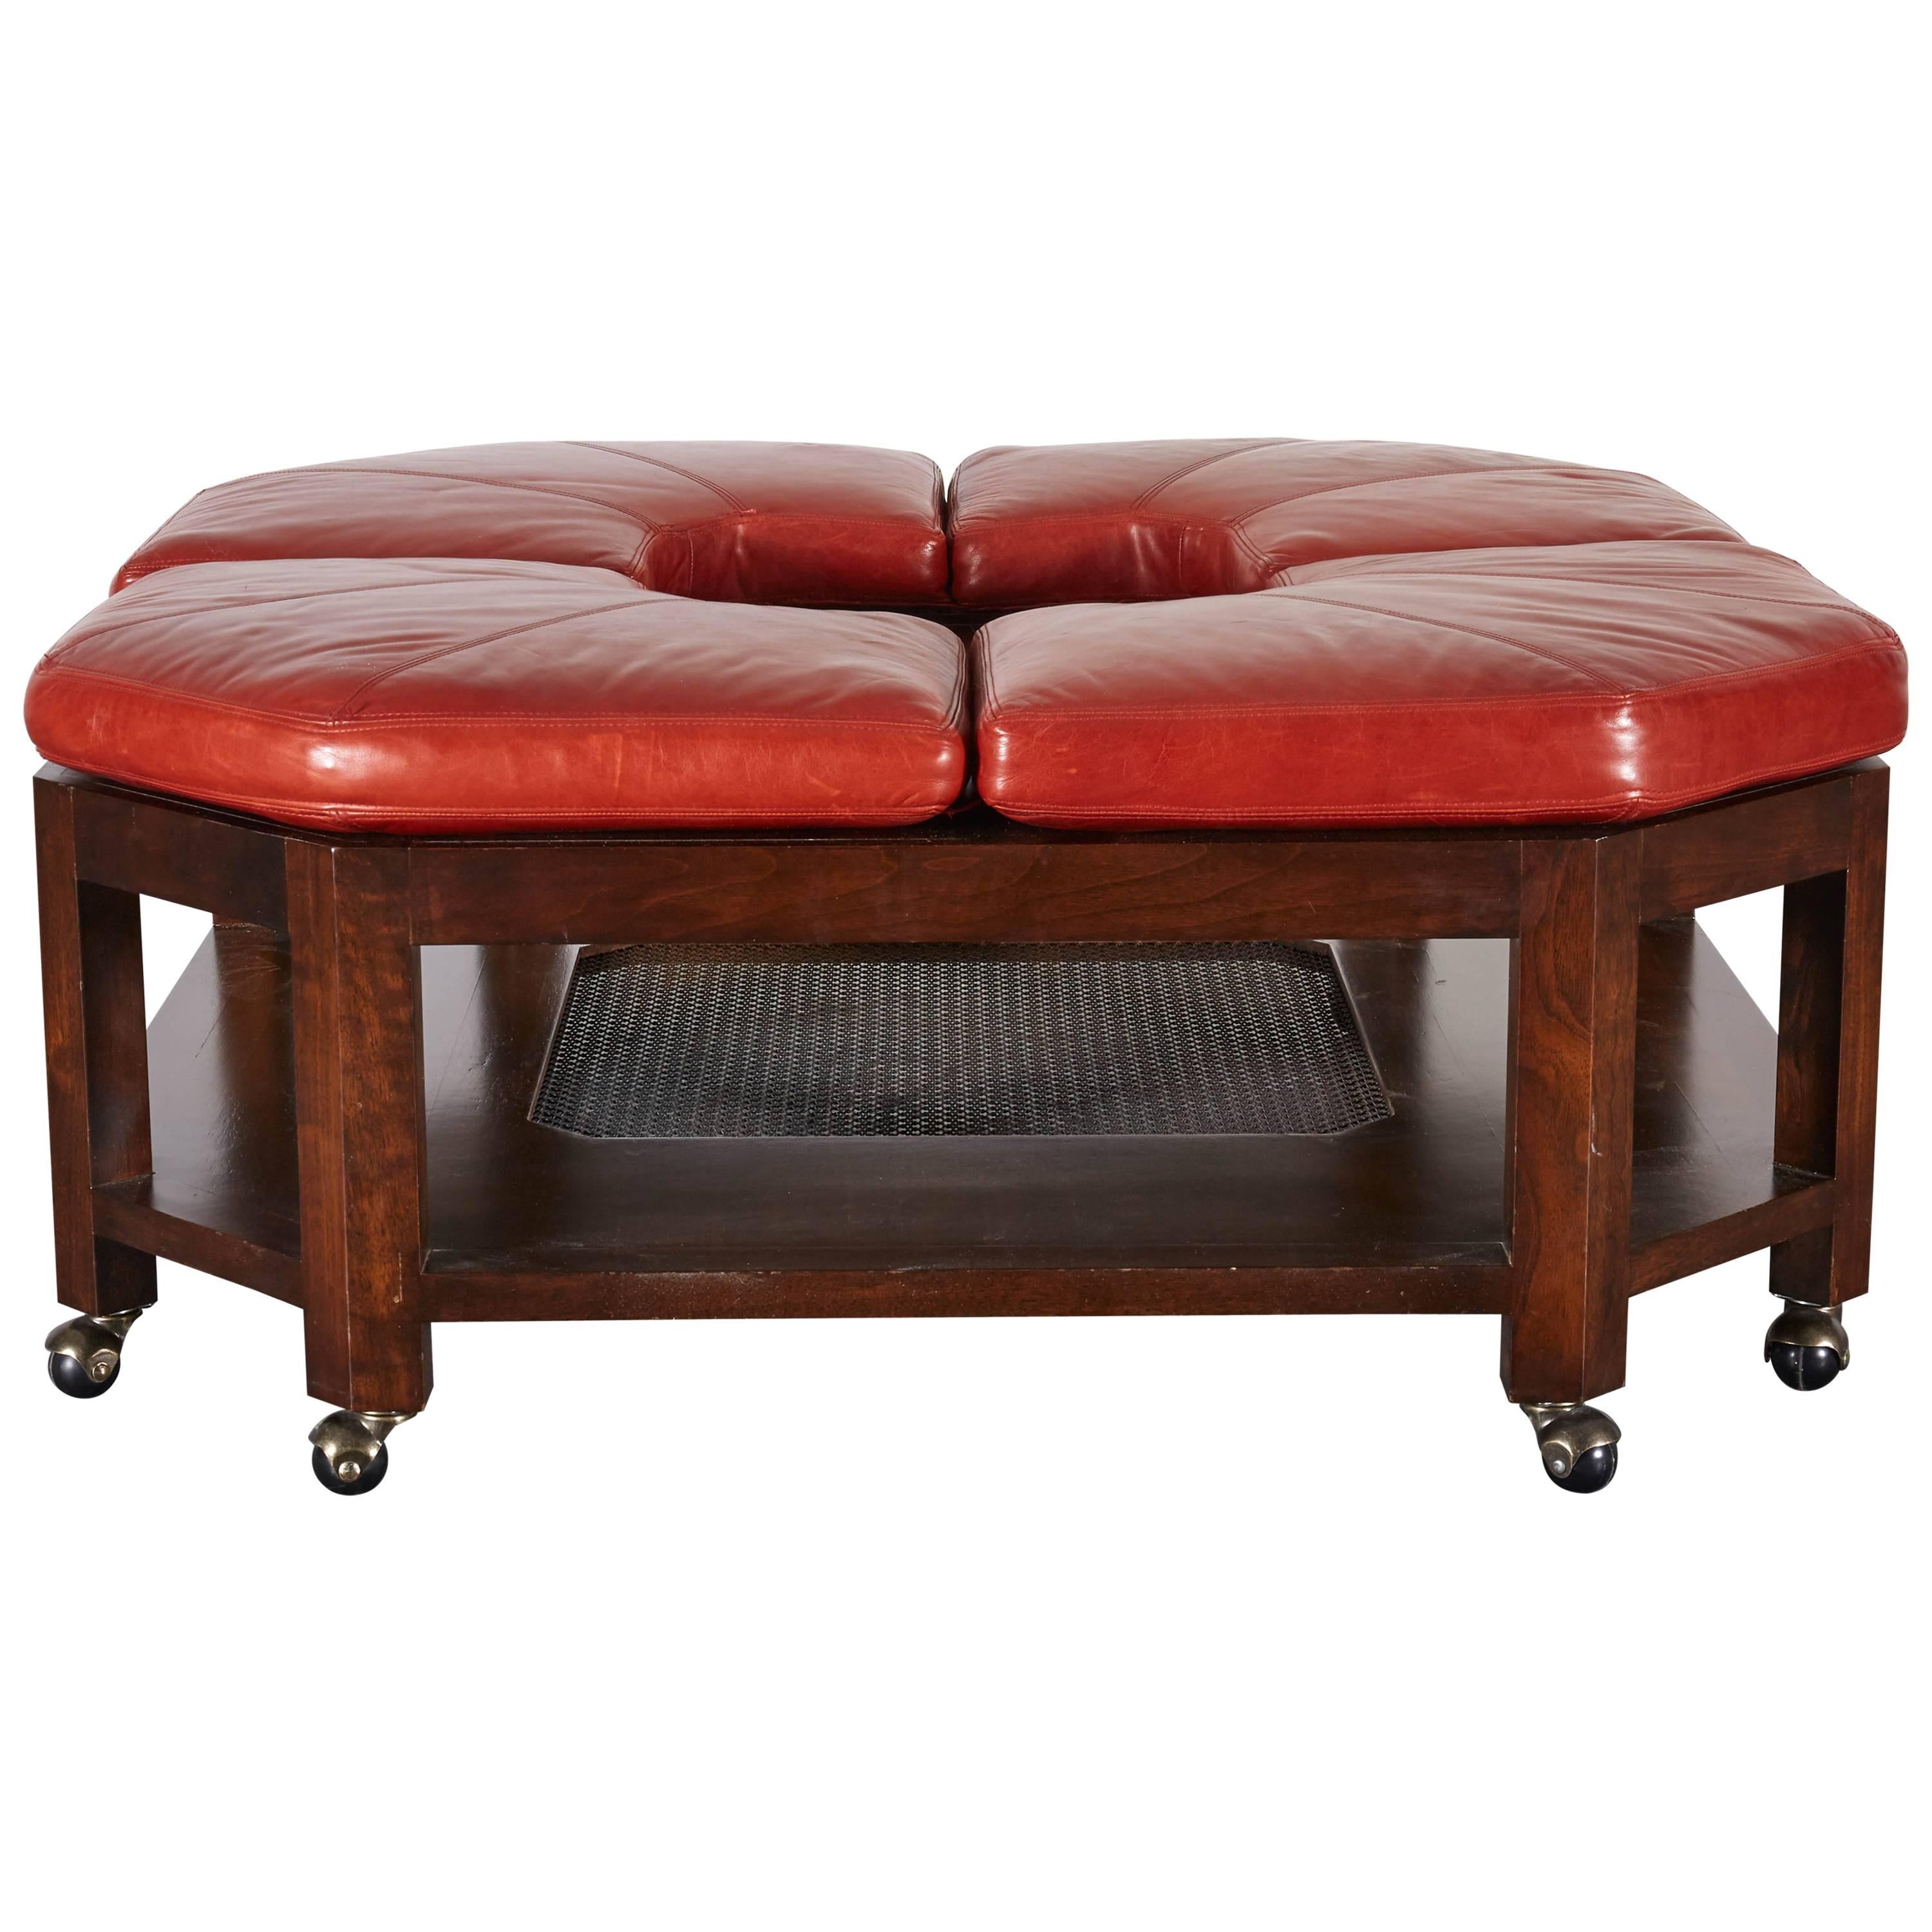 David Easton Brick Red Leather and Walnut Square Ottoman Coffee Table